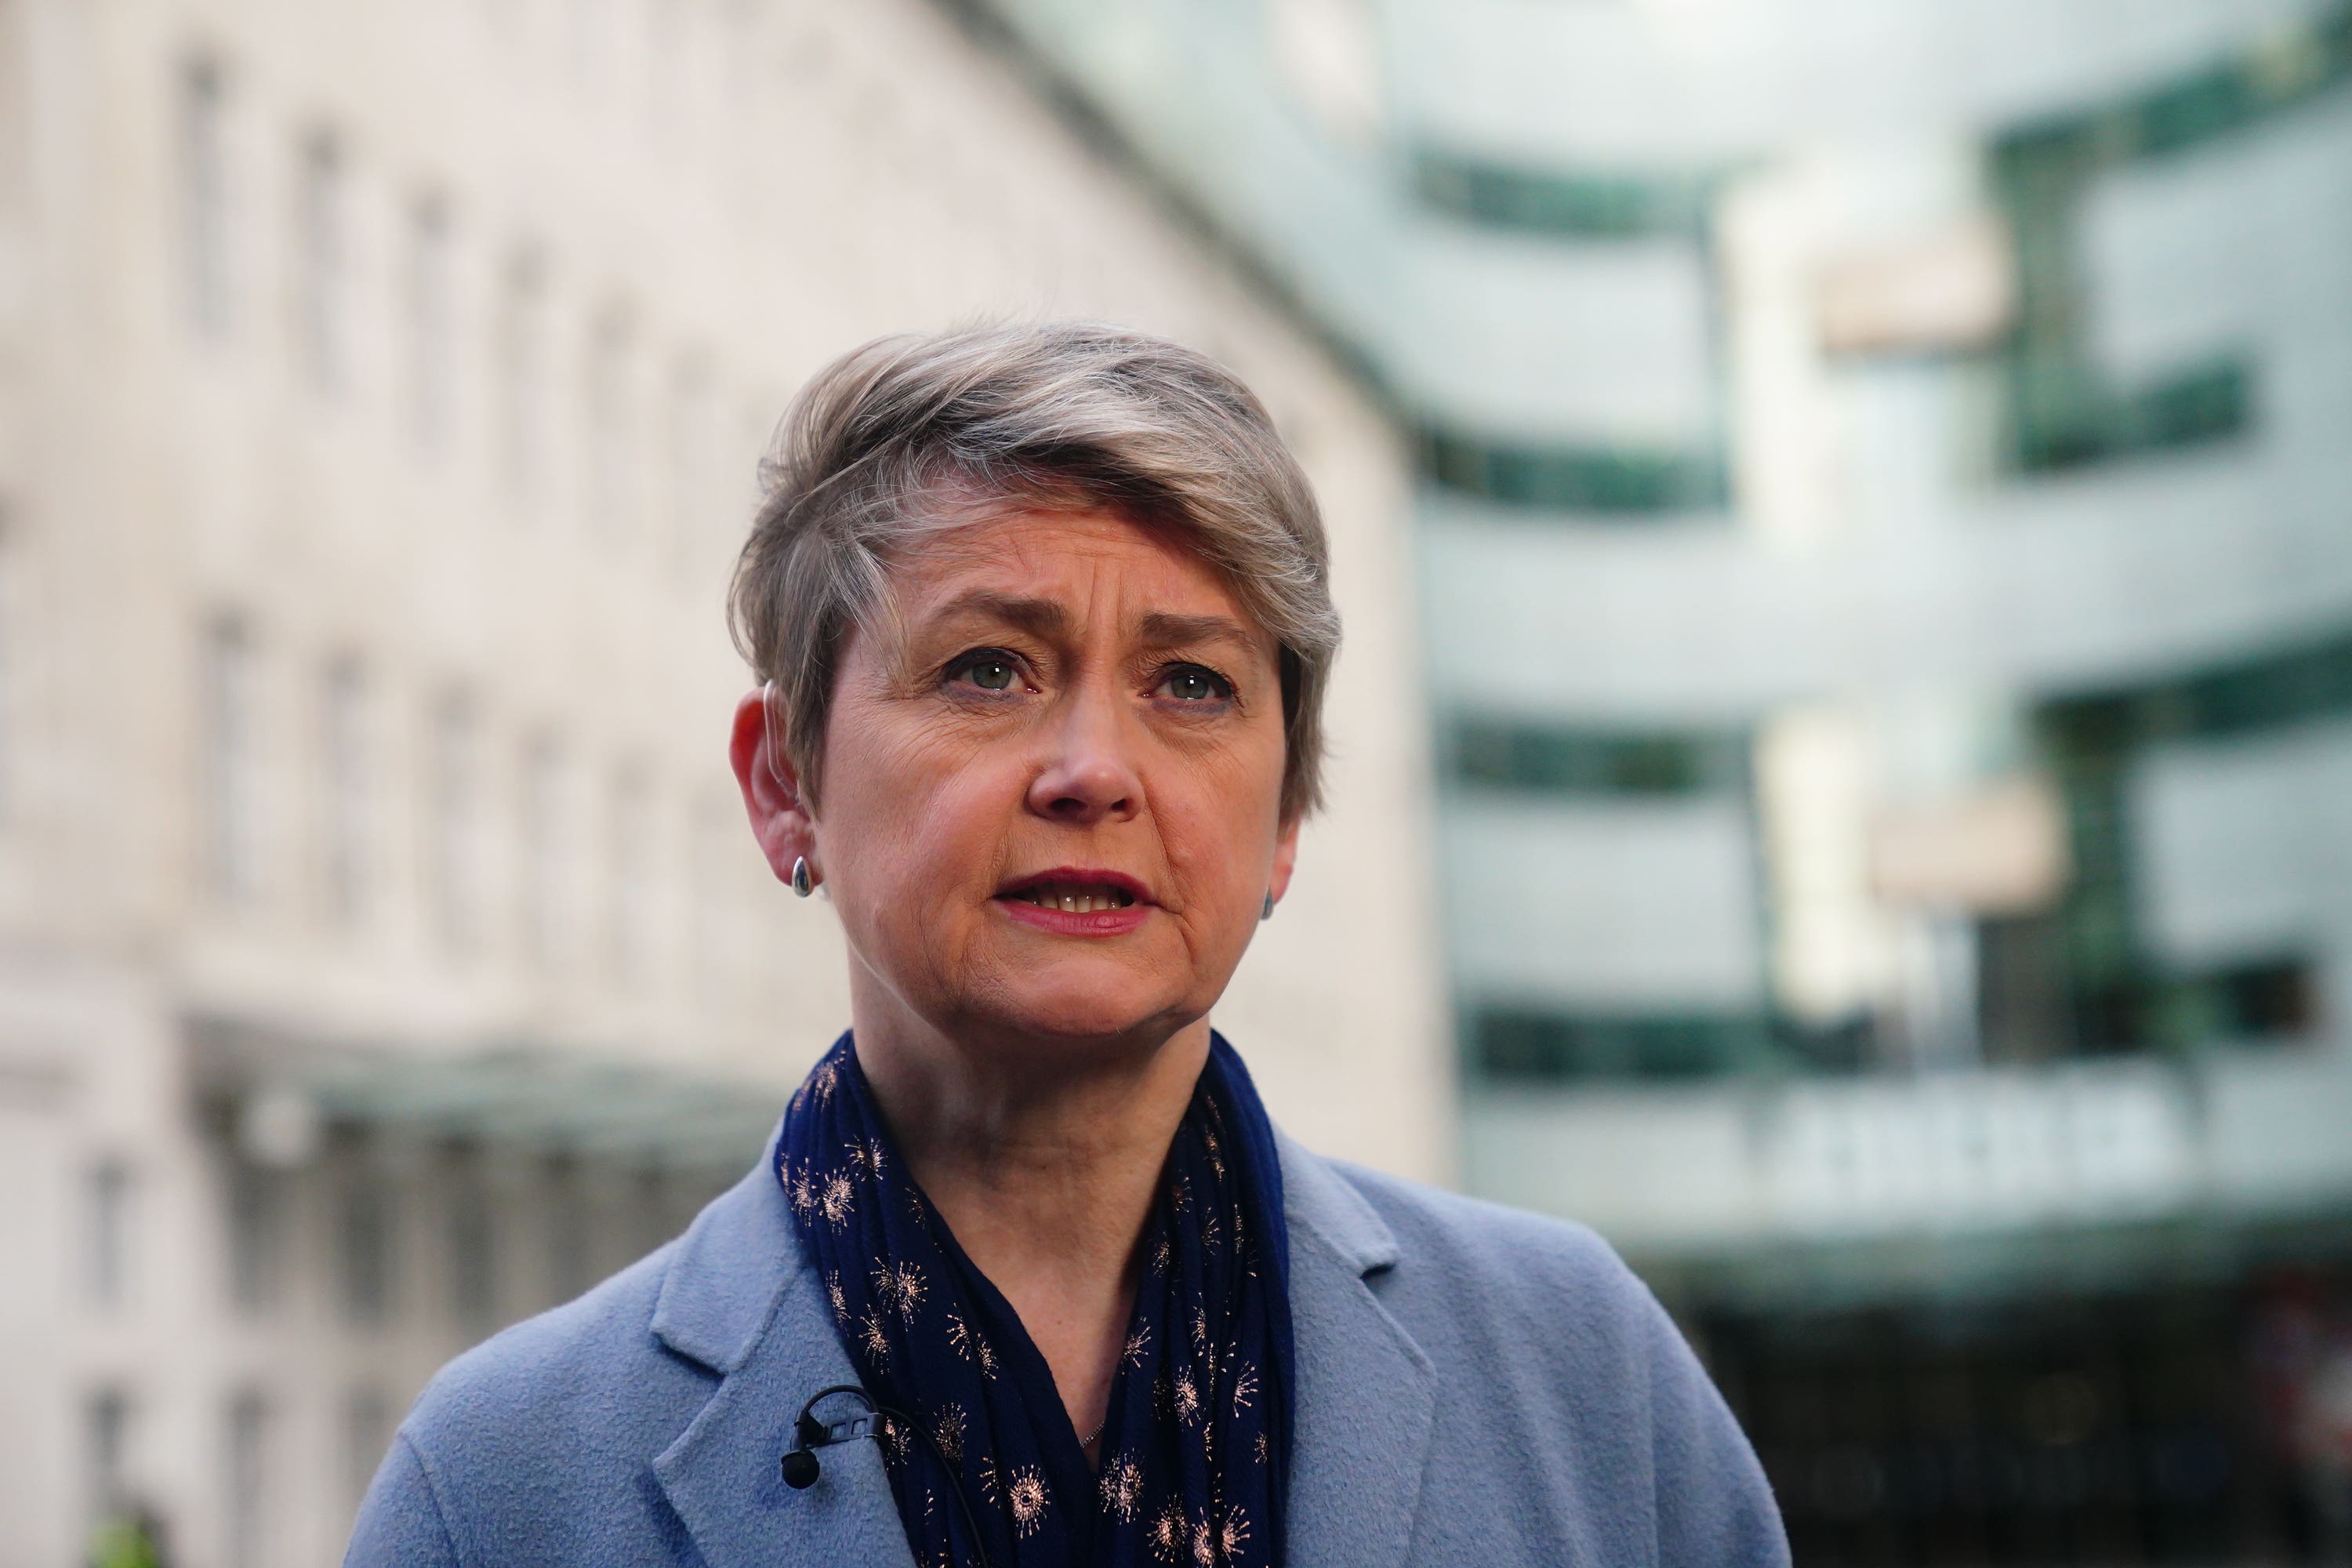 Shadow home secretary Yvette Cooper has promised to clamp down on police failings, launching Labour’s plans to force change in an article in The Independent